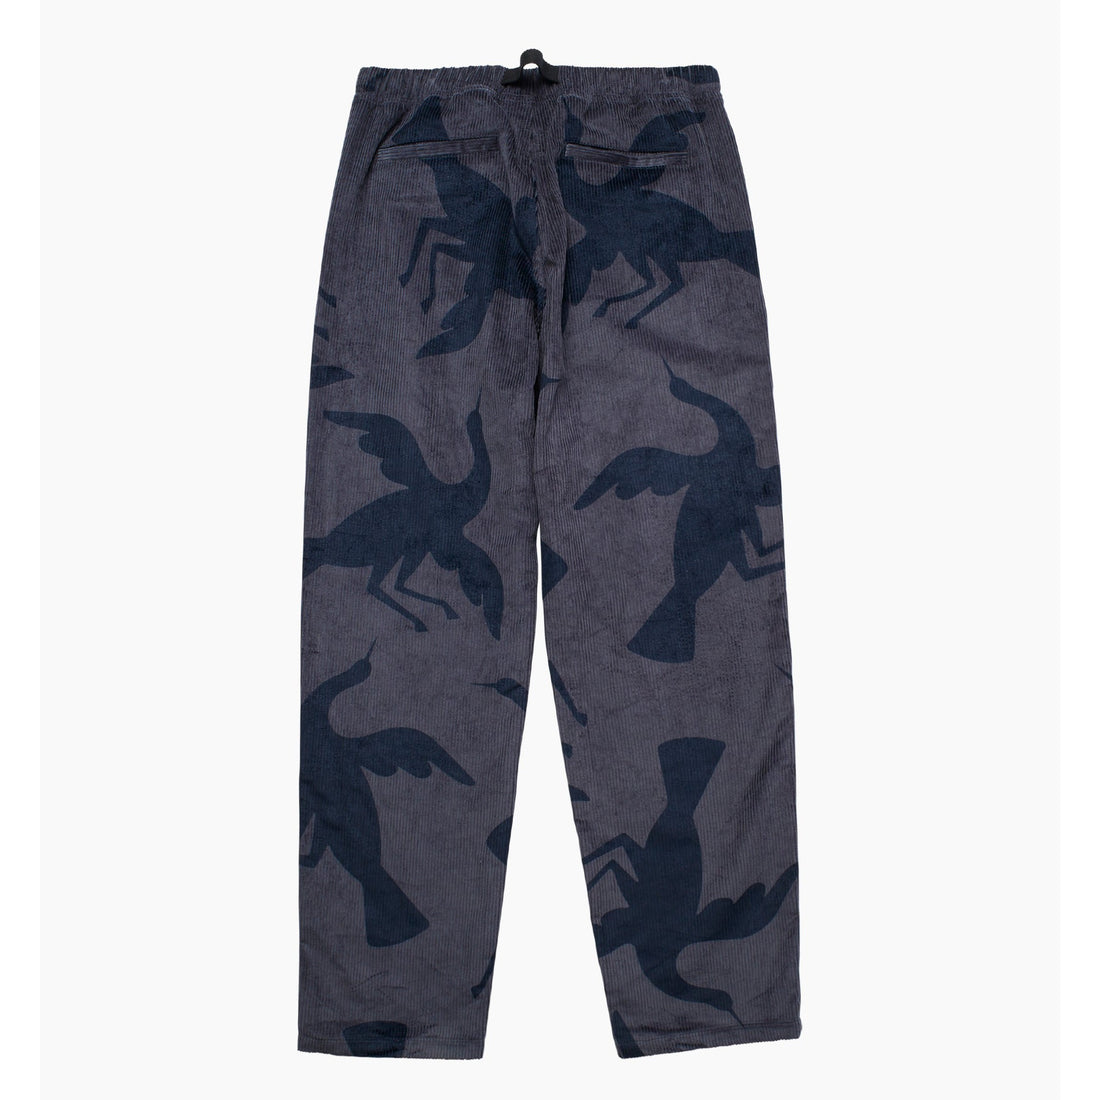 BY PARRA - CLIPPED WINGS CORDUROY PANTS - GREYISH BLUE